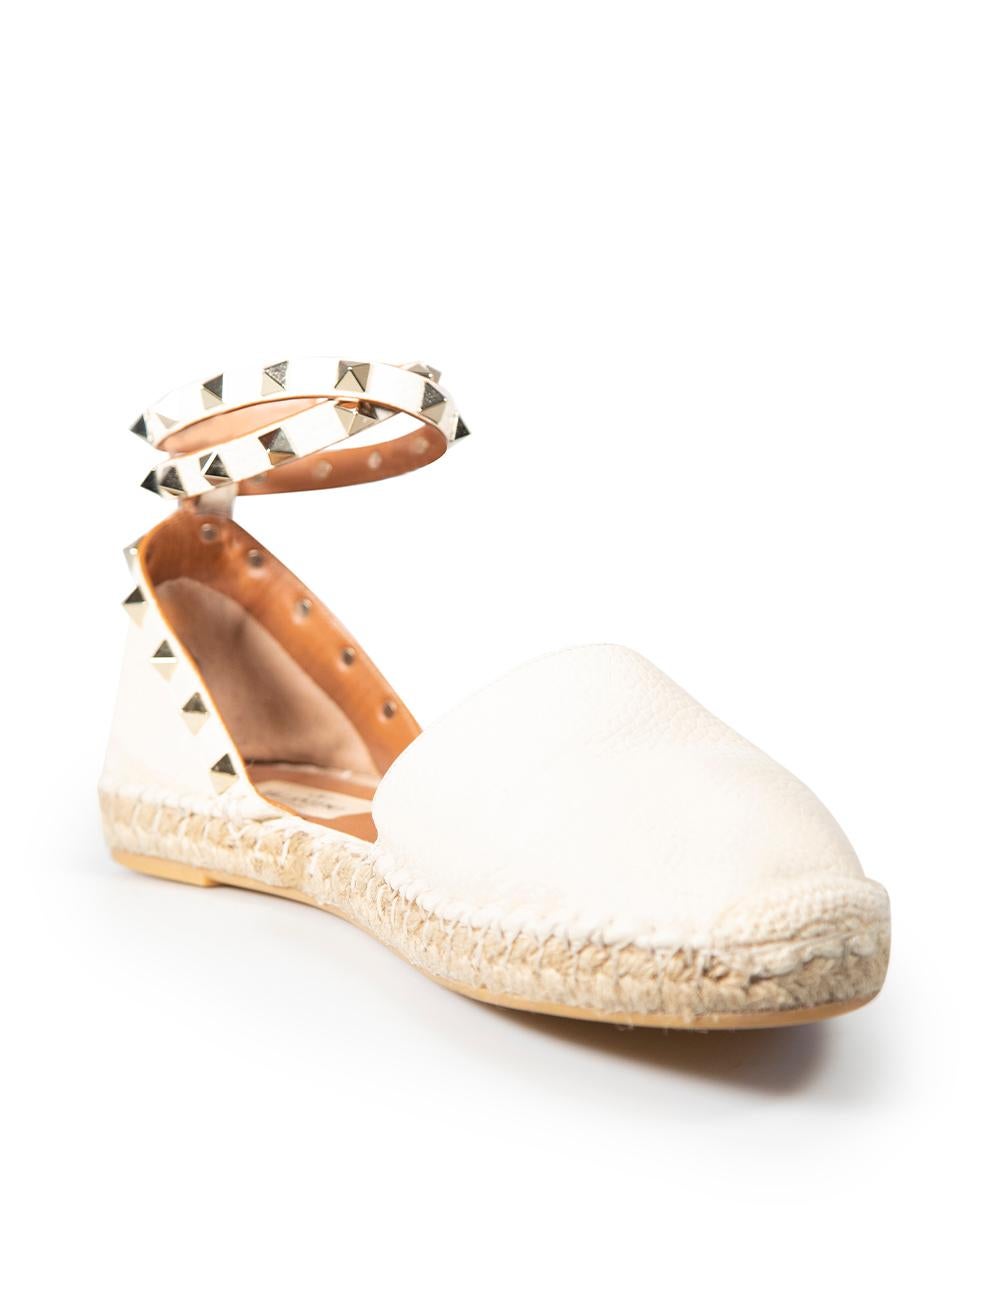 CONDITION is Very good. Minimal wear to shoes is evident. Minimal wear with general creasing to the leather and discolouration to the heels on this used Valentino designer resale item.
 
 Details
 Cream
 Leather
 Espadrilles
 Round toe
 Rockstud